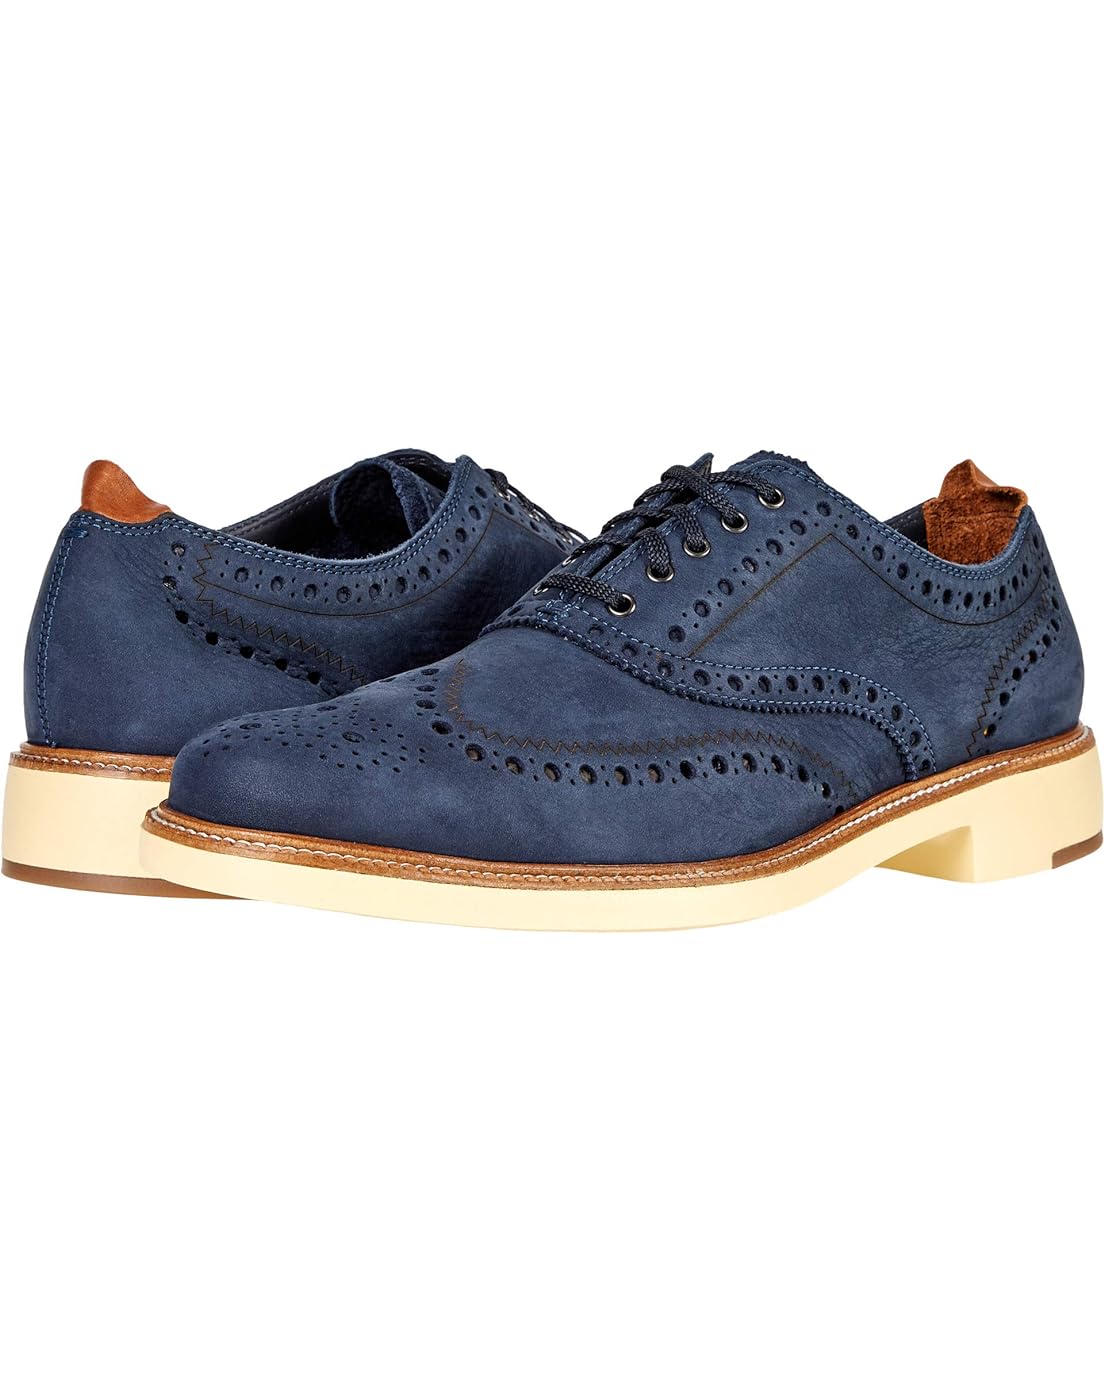 Cole Haan 7Day Wing Oxford